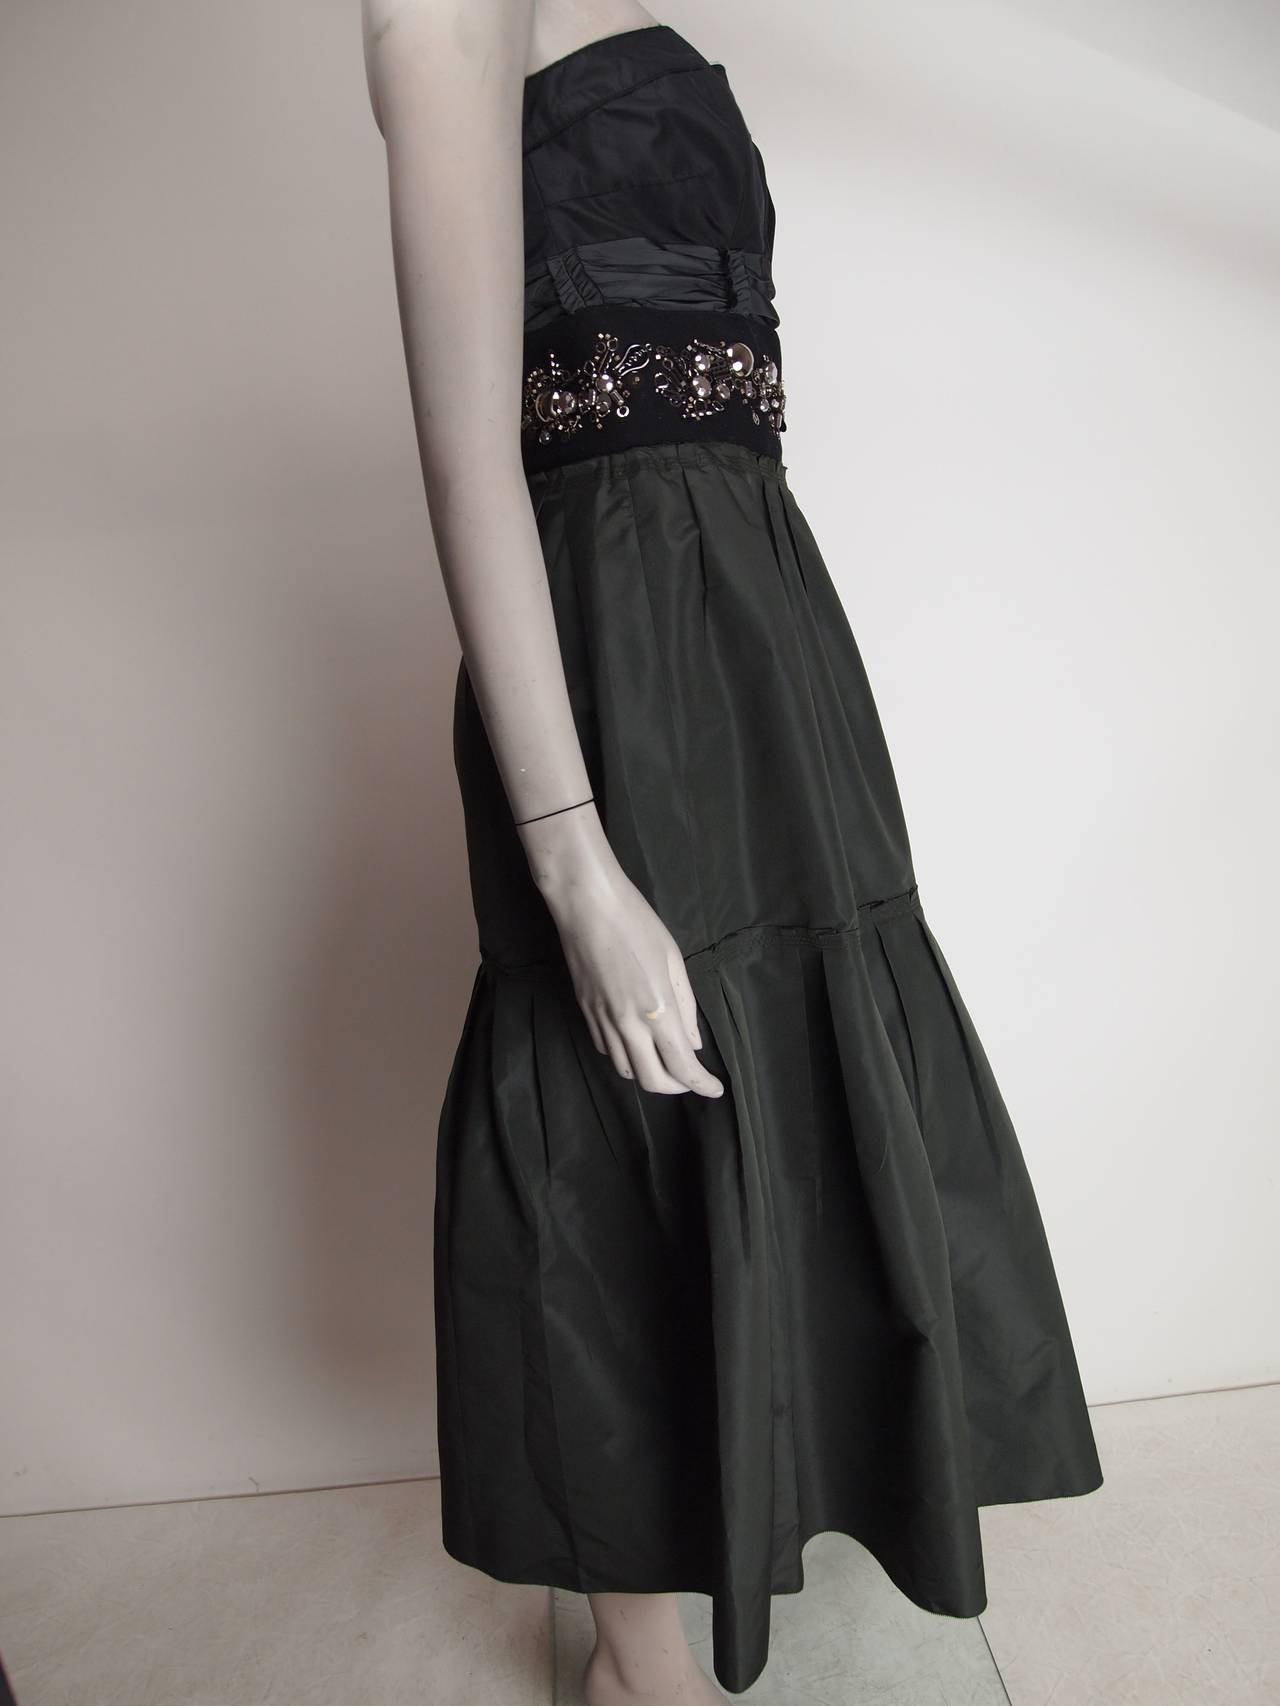 Prada Fall 2006, black and dark green staples dress with silver-tone embellishment at waistband and side zip closure.
Bust 34”, Waist 28”, Hip 38”, Length 45”